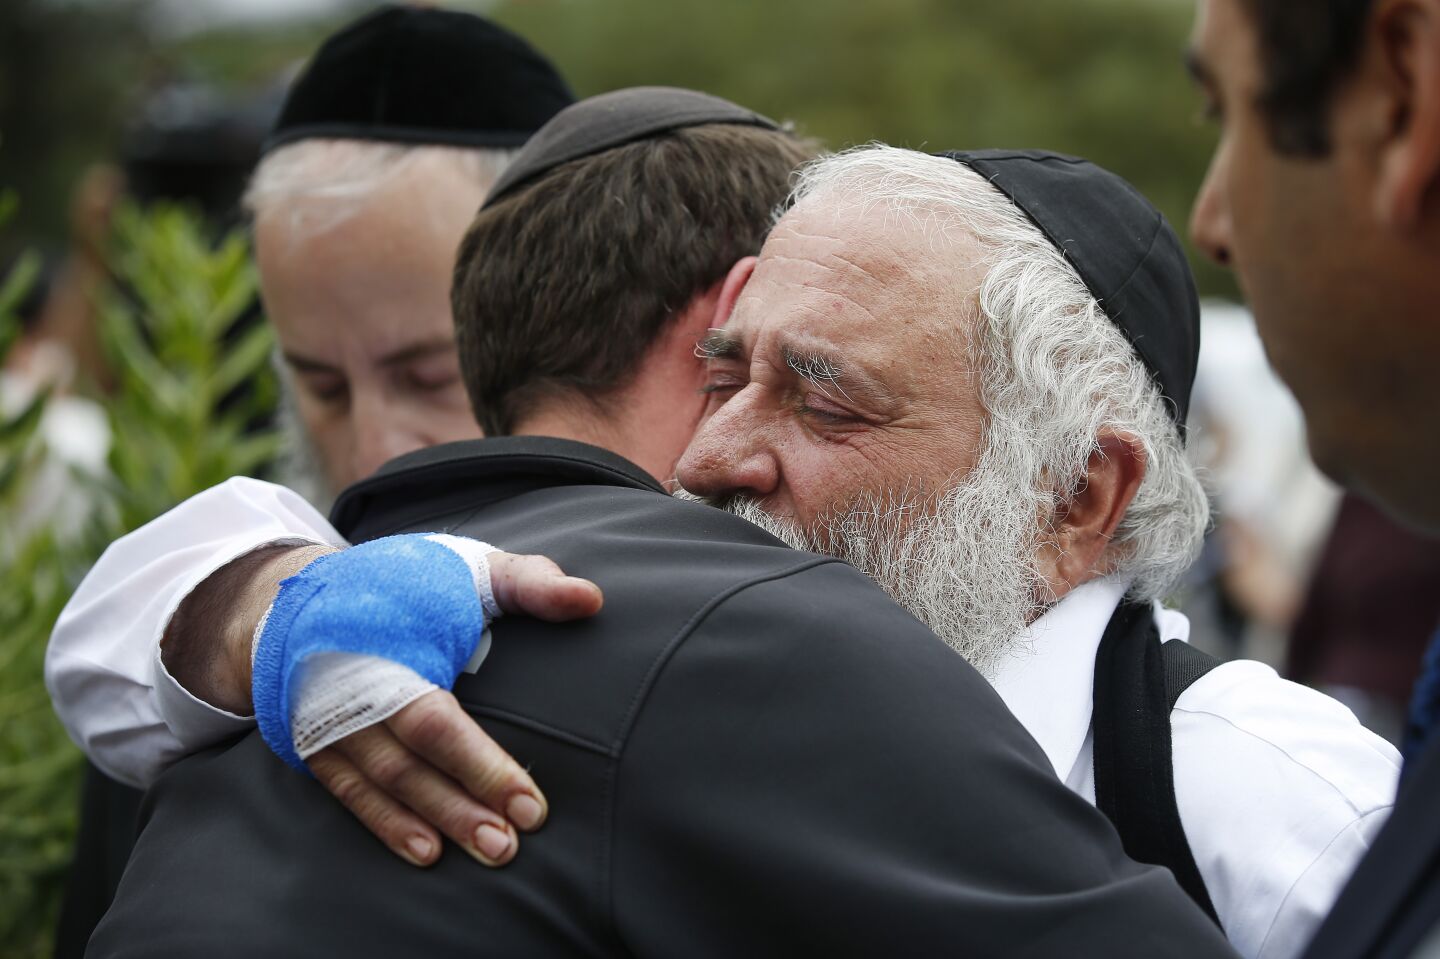 Rabbi Yisroel Goldstein hugs a member of the congregation of Chabad of Poway the day after a deadly shooting took place there on April 28, 2019 in Poway, California.